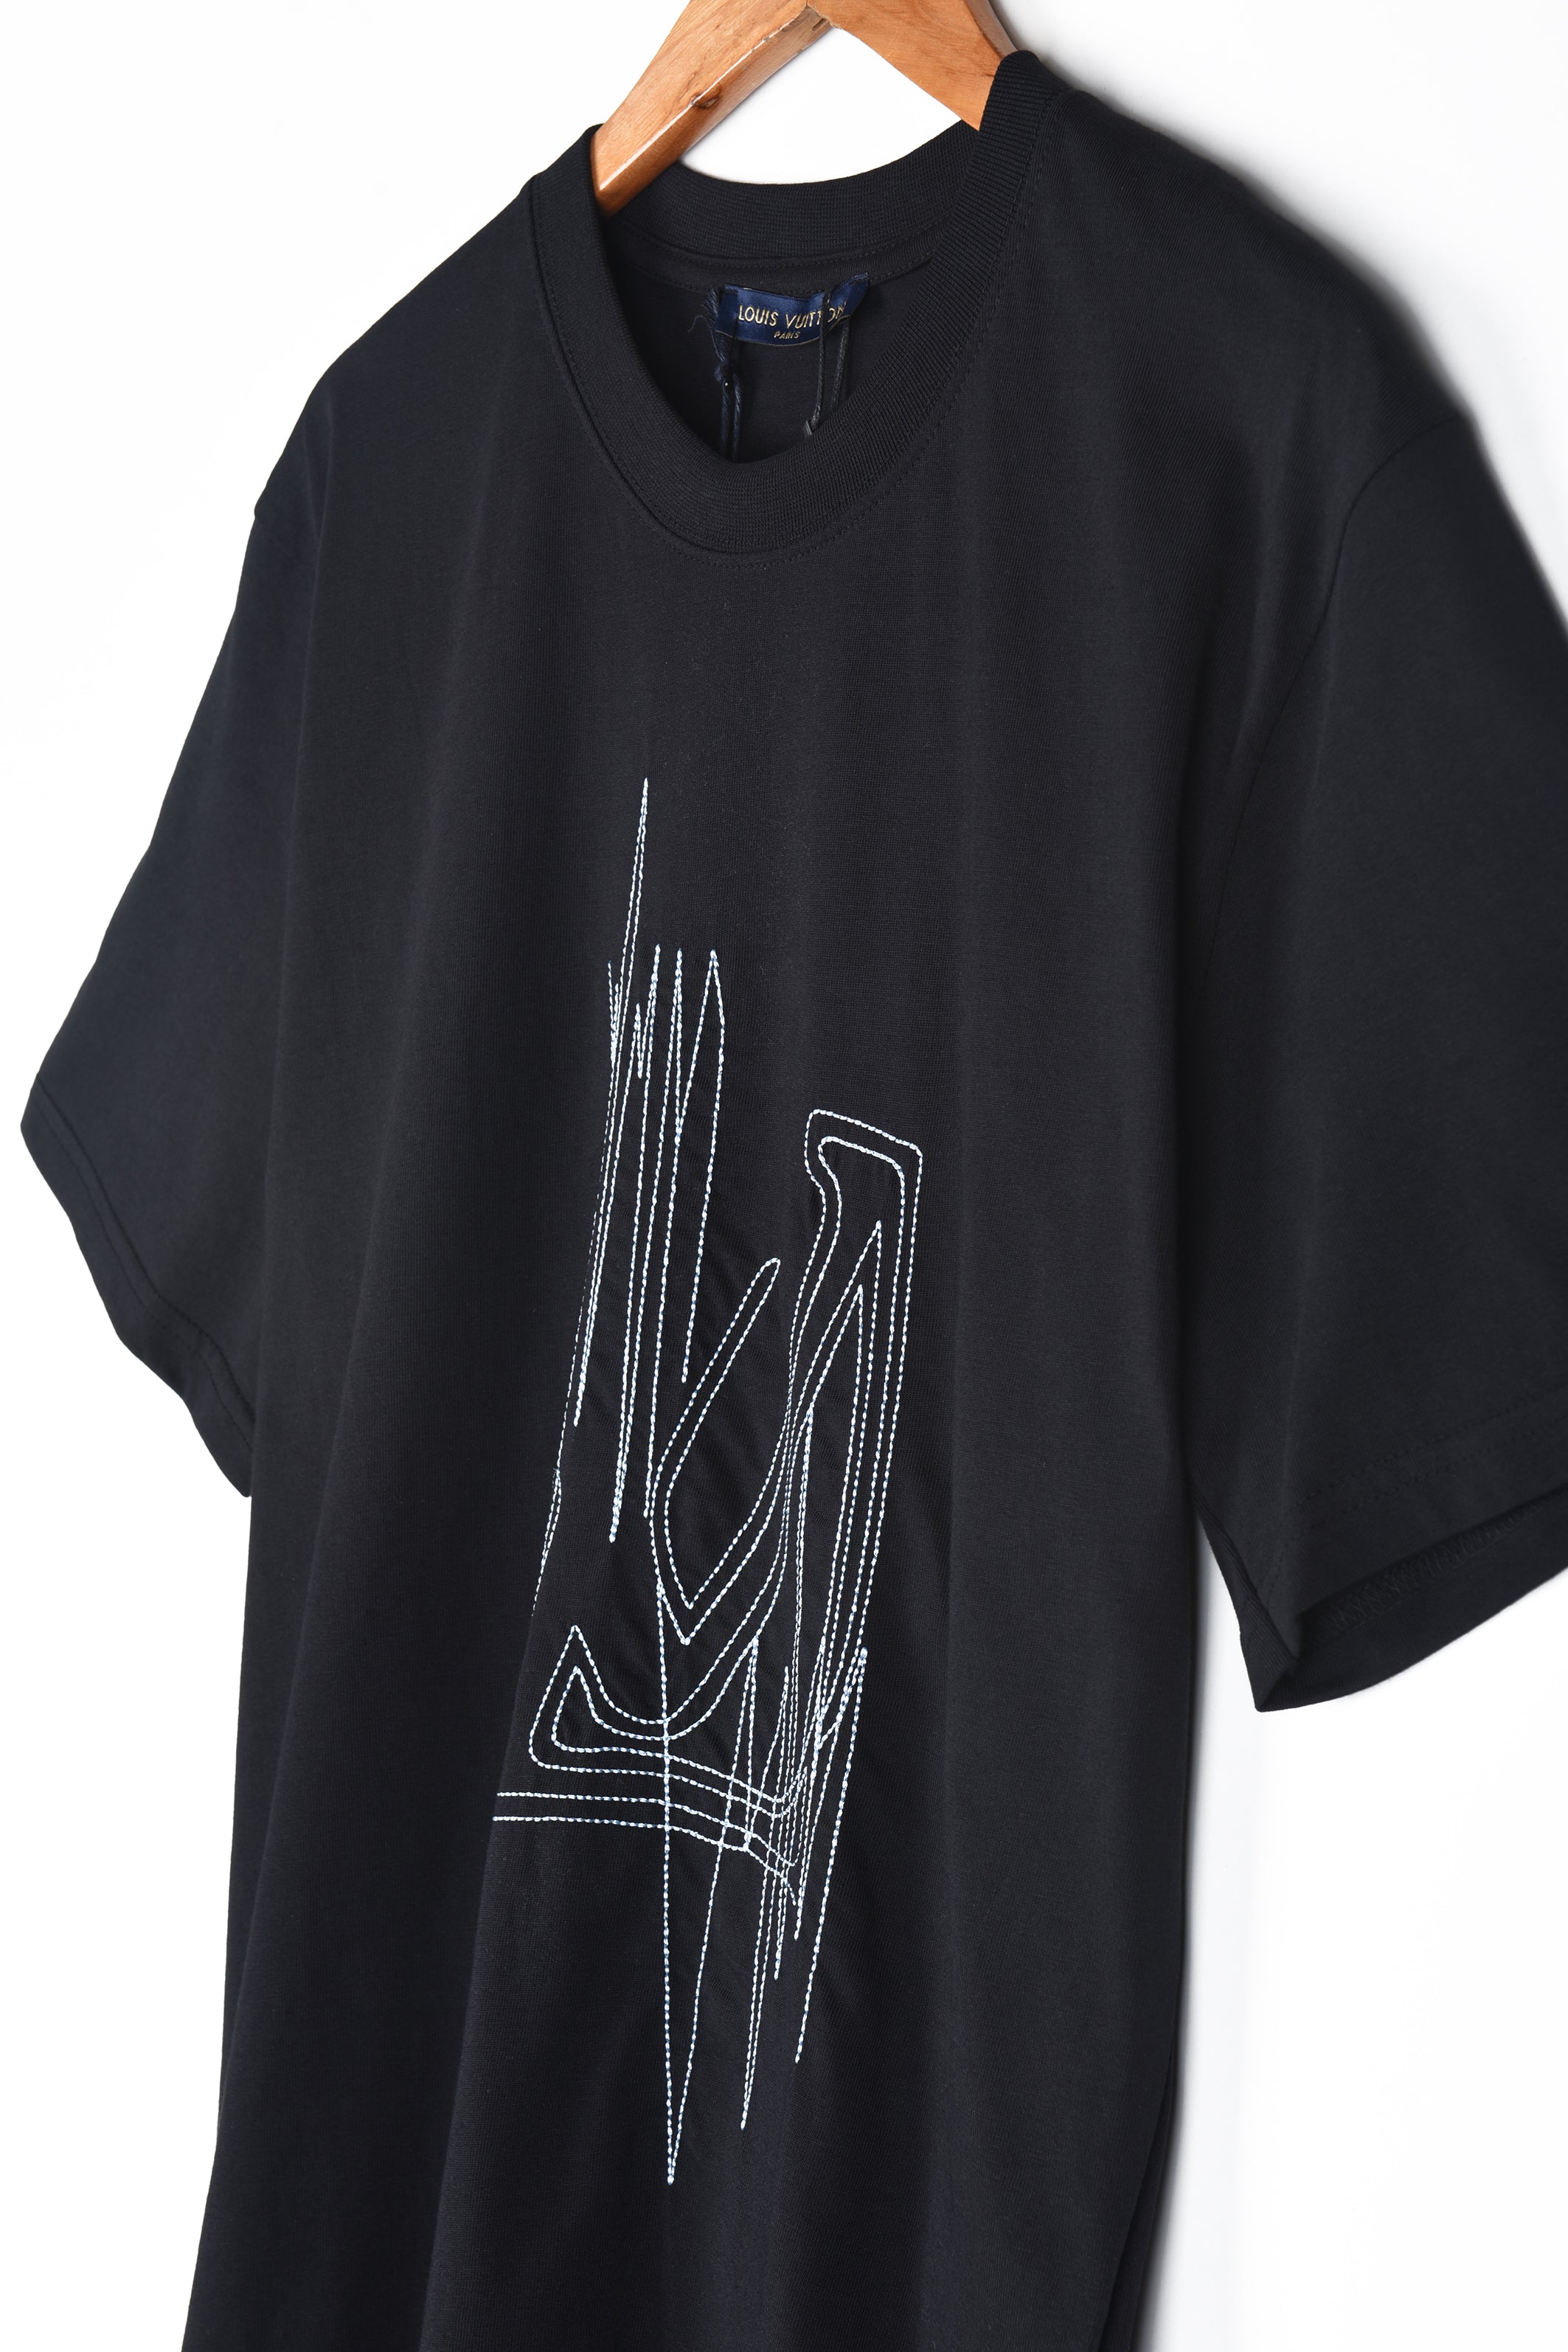 LV Frequency Graphic T-Shirt - Luxury Black